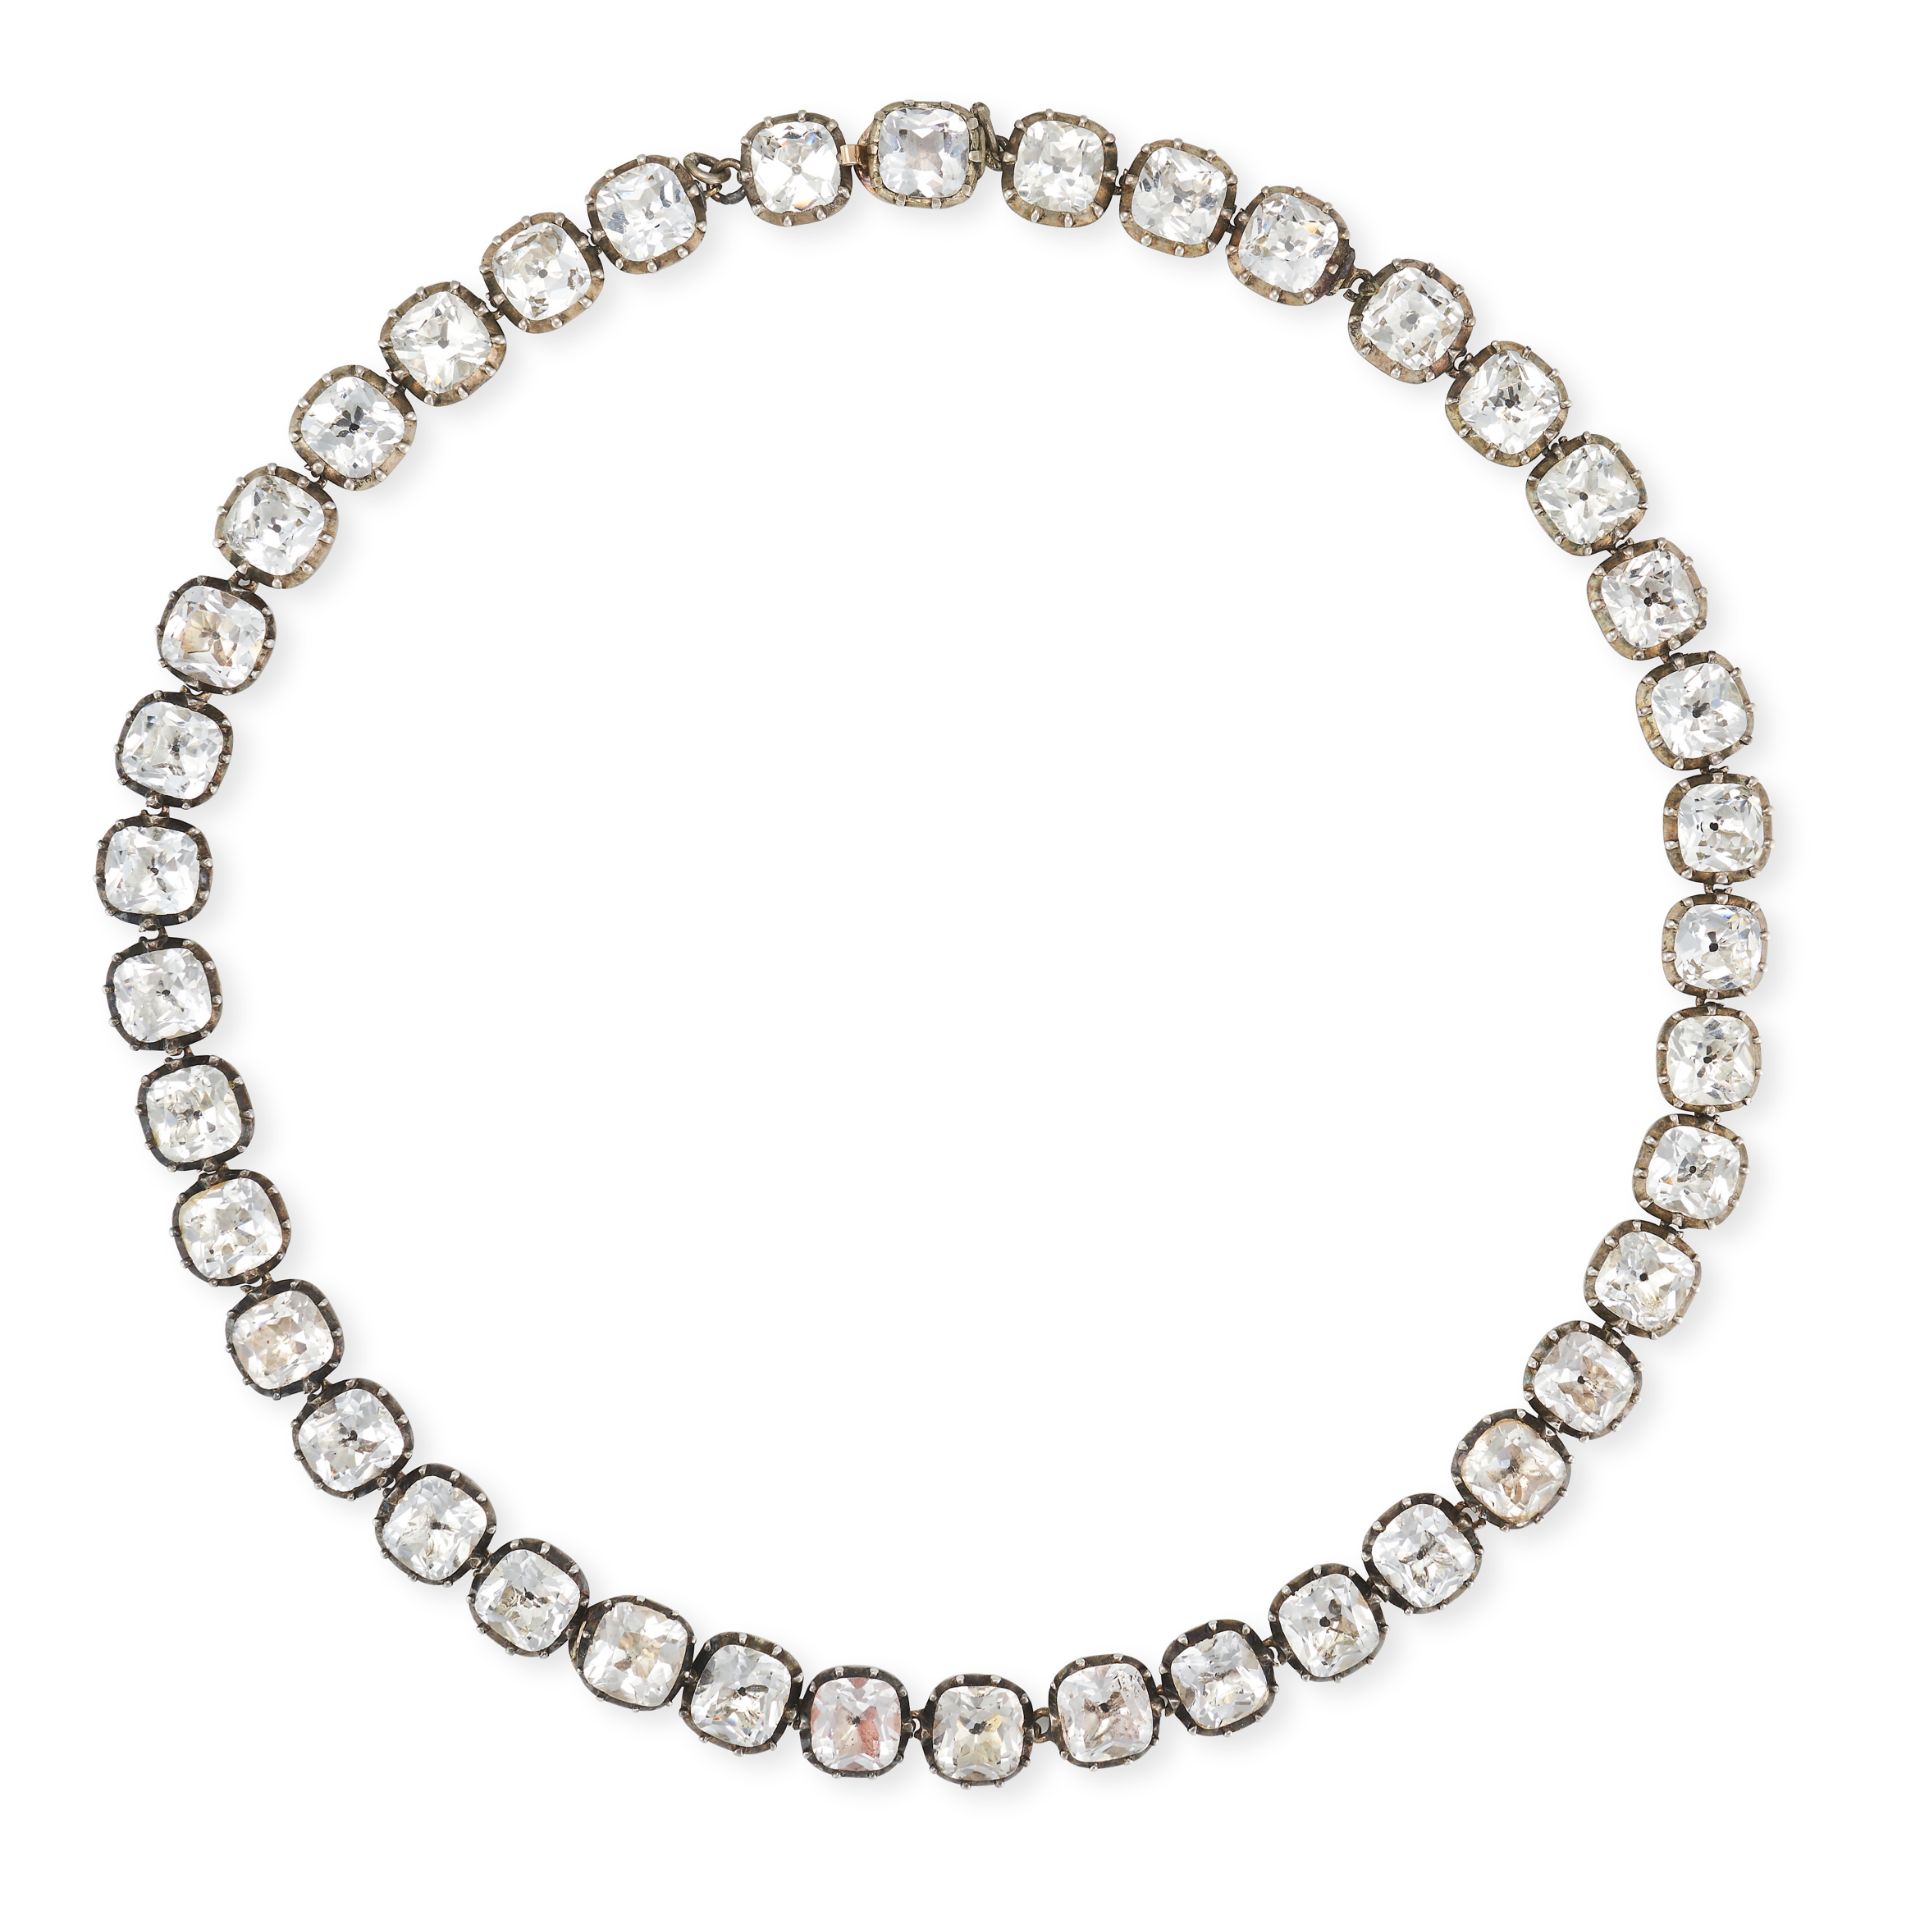 AN ANTIQUE BLACK DOT PASTE RIVIERE NECKLACE in silver, comprising a single row of cushion cut bla...